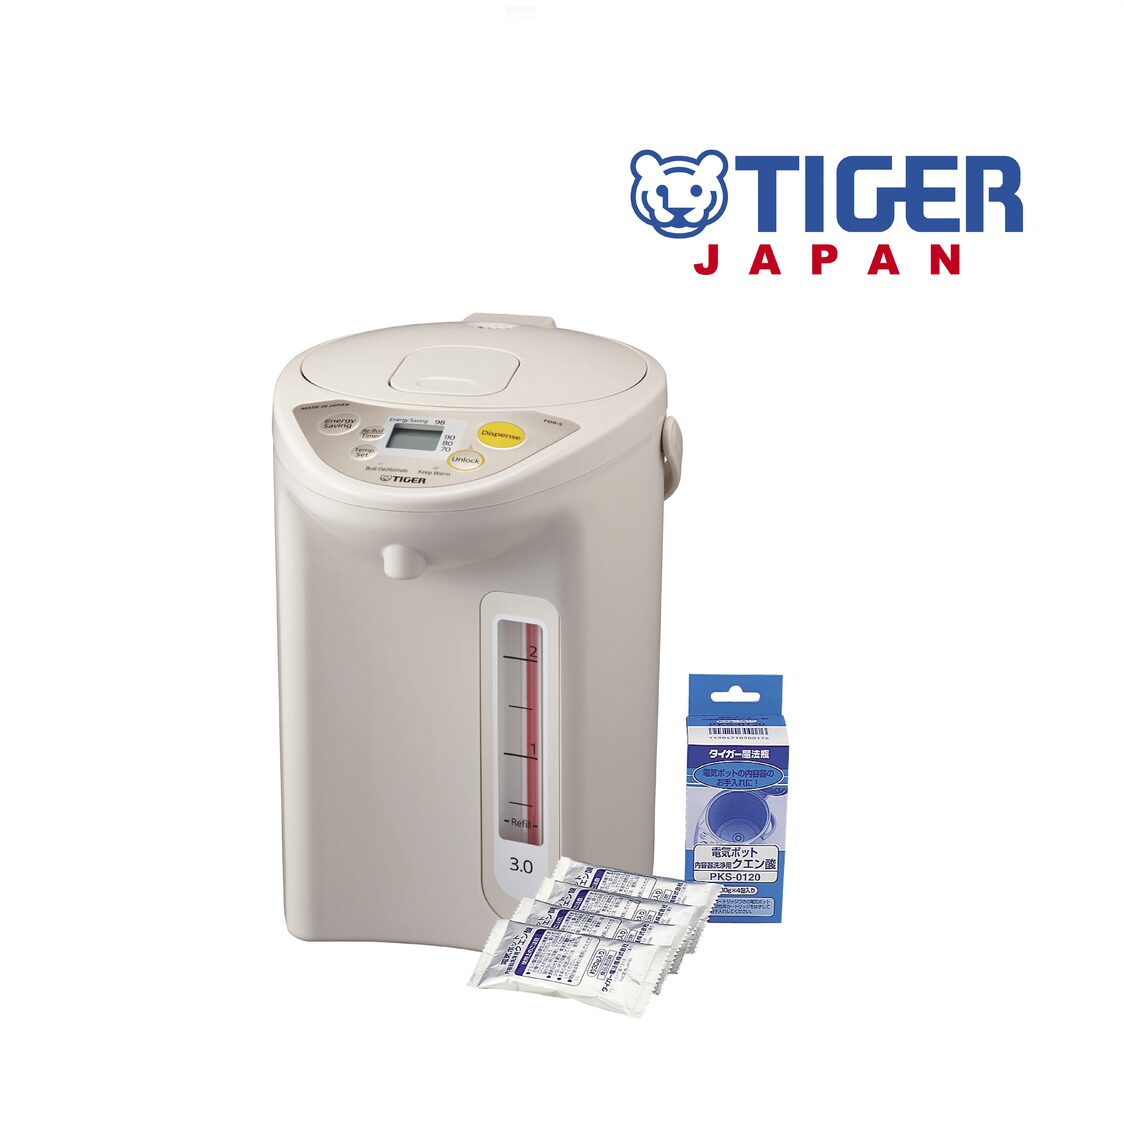 TIGER 30L Electric Water Heater  TIGER Citric Acid Airpot Cleaner Made In Japan PDR-S30SPKS-0120